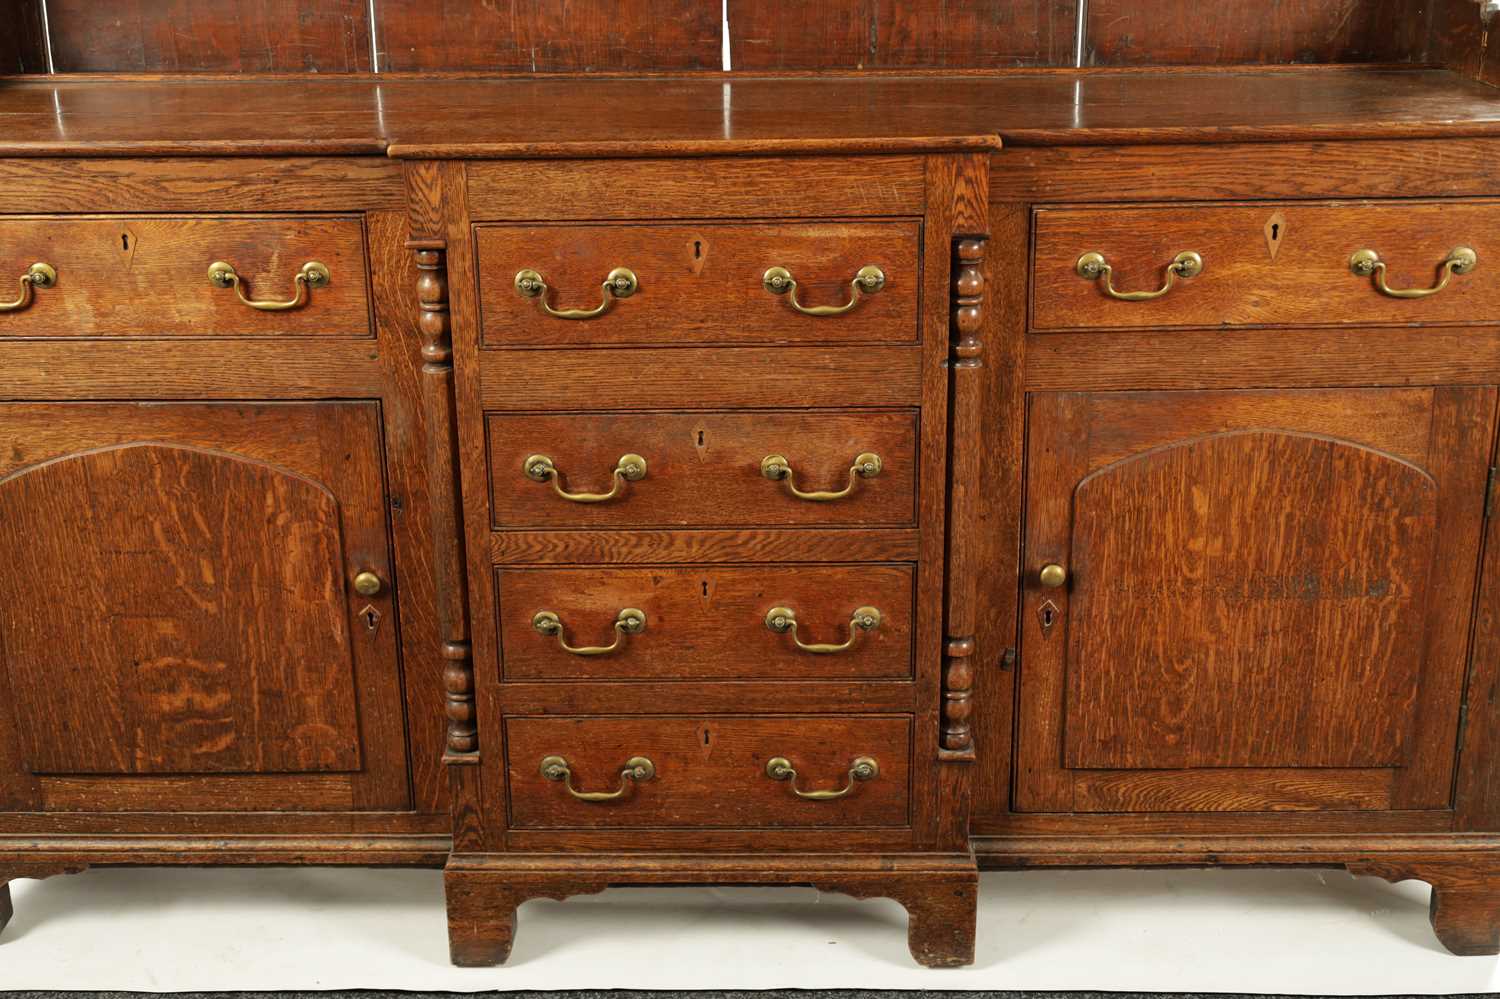 A LATE 18TH CENTURY WELSH OAK DRESSER AND RACK - Image 2 of 10